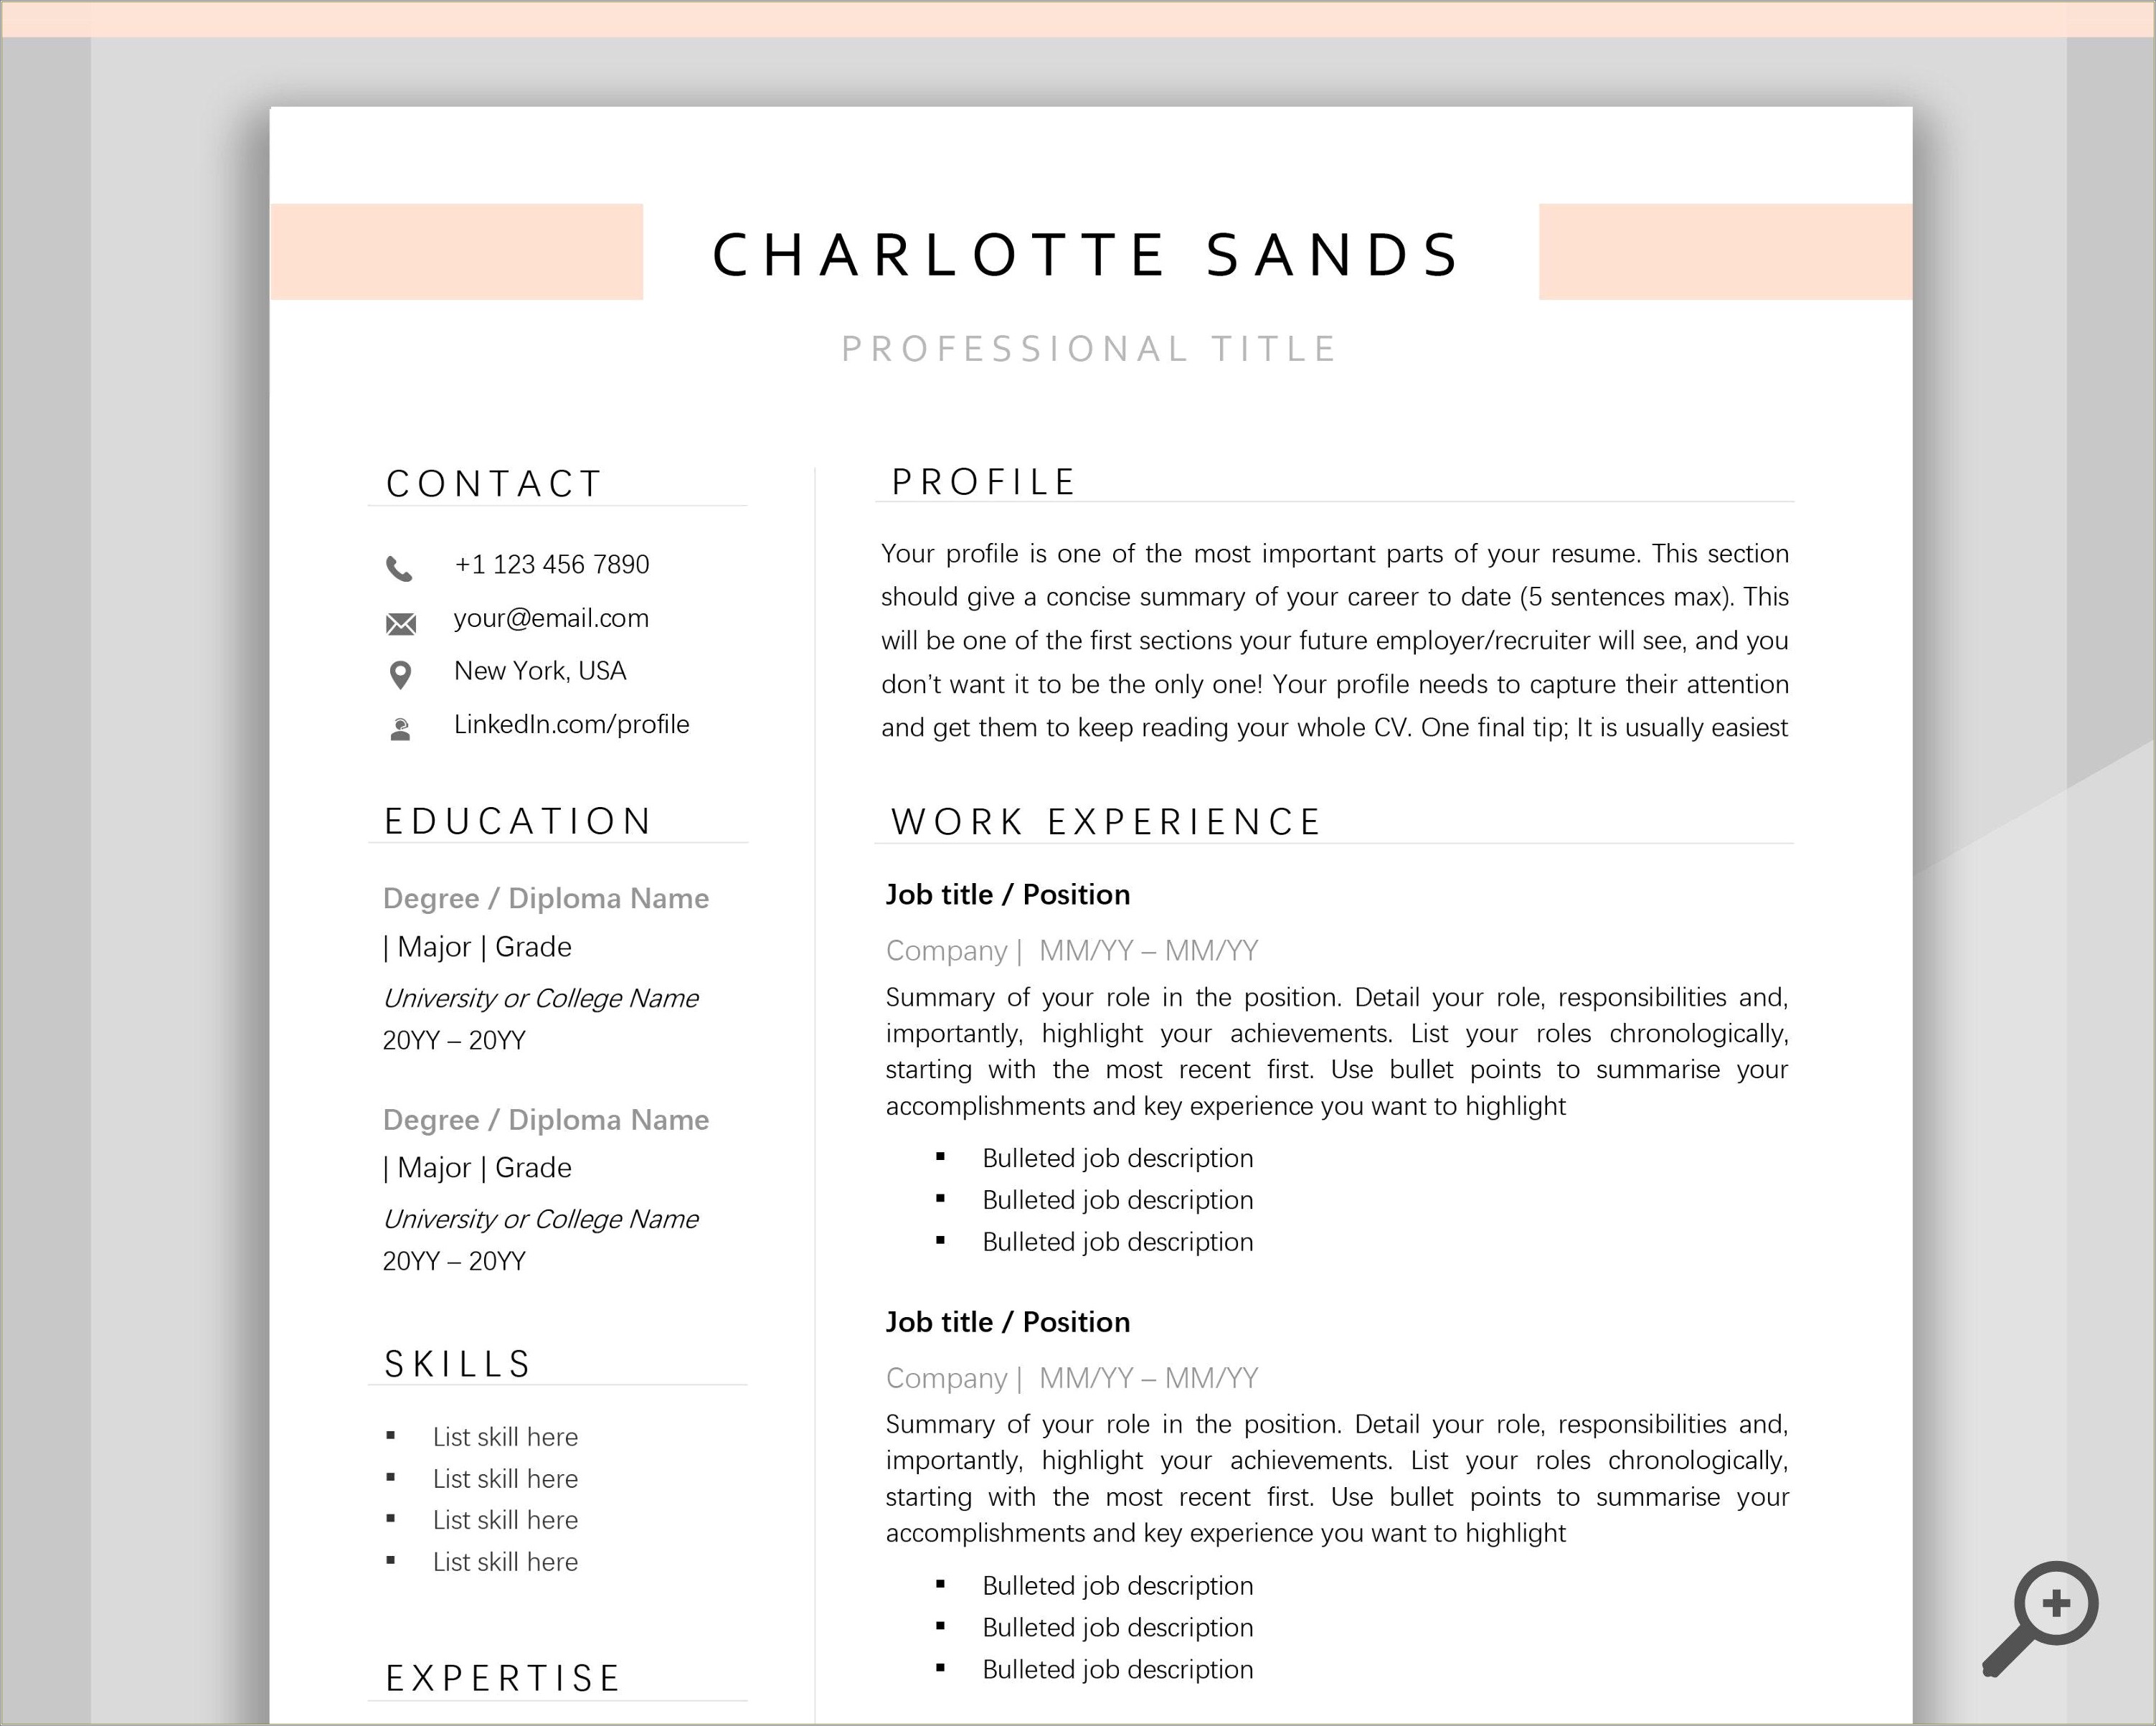 Professional Resume Format In Word File